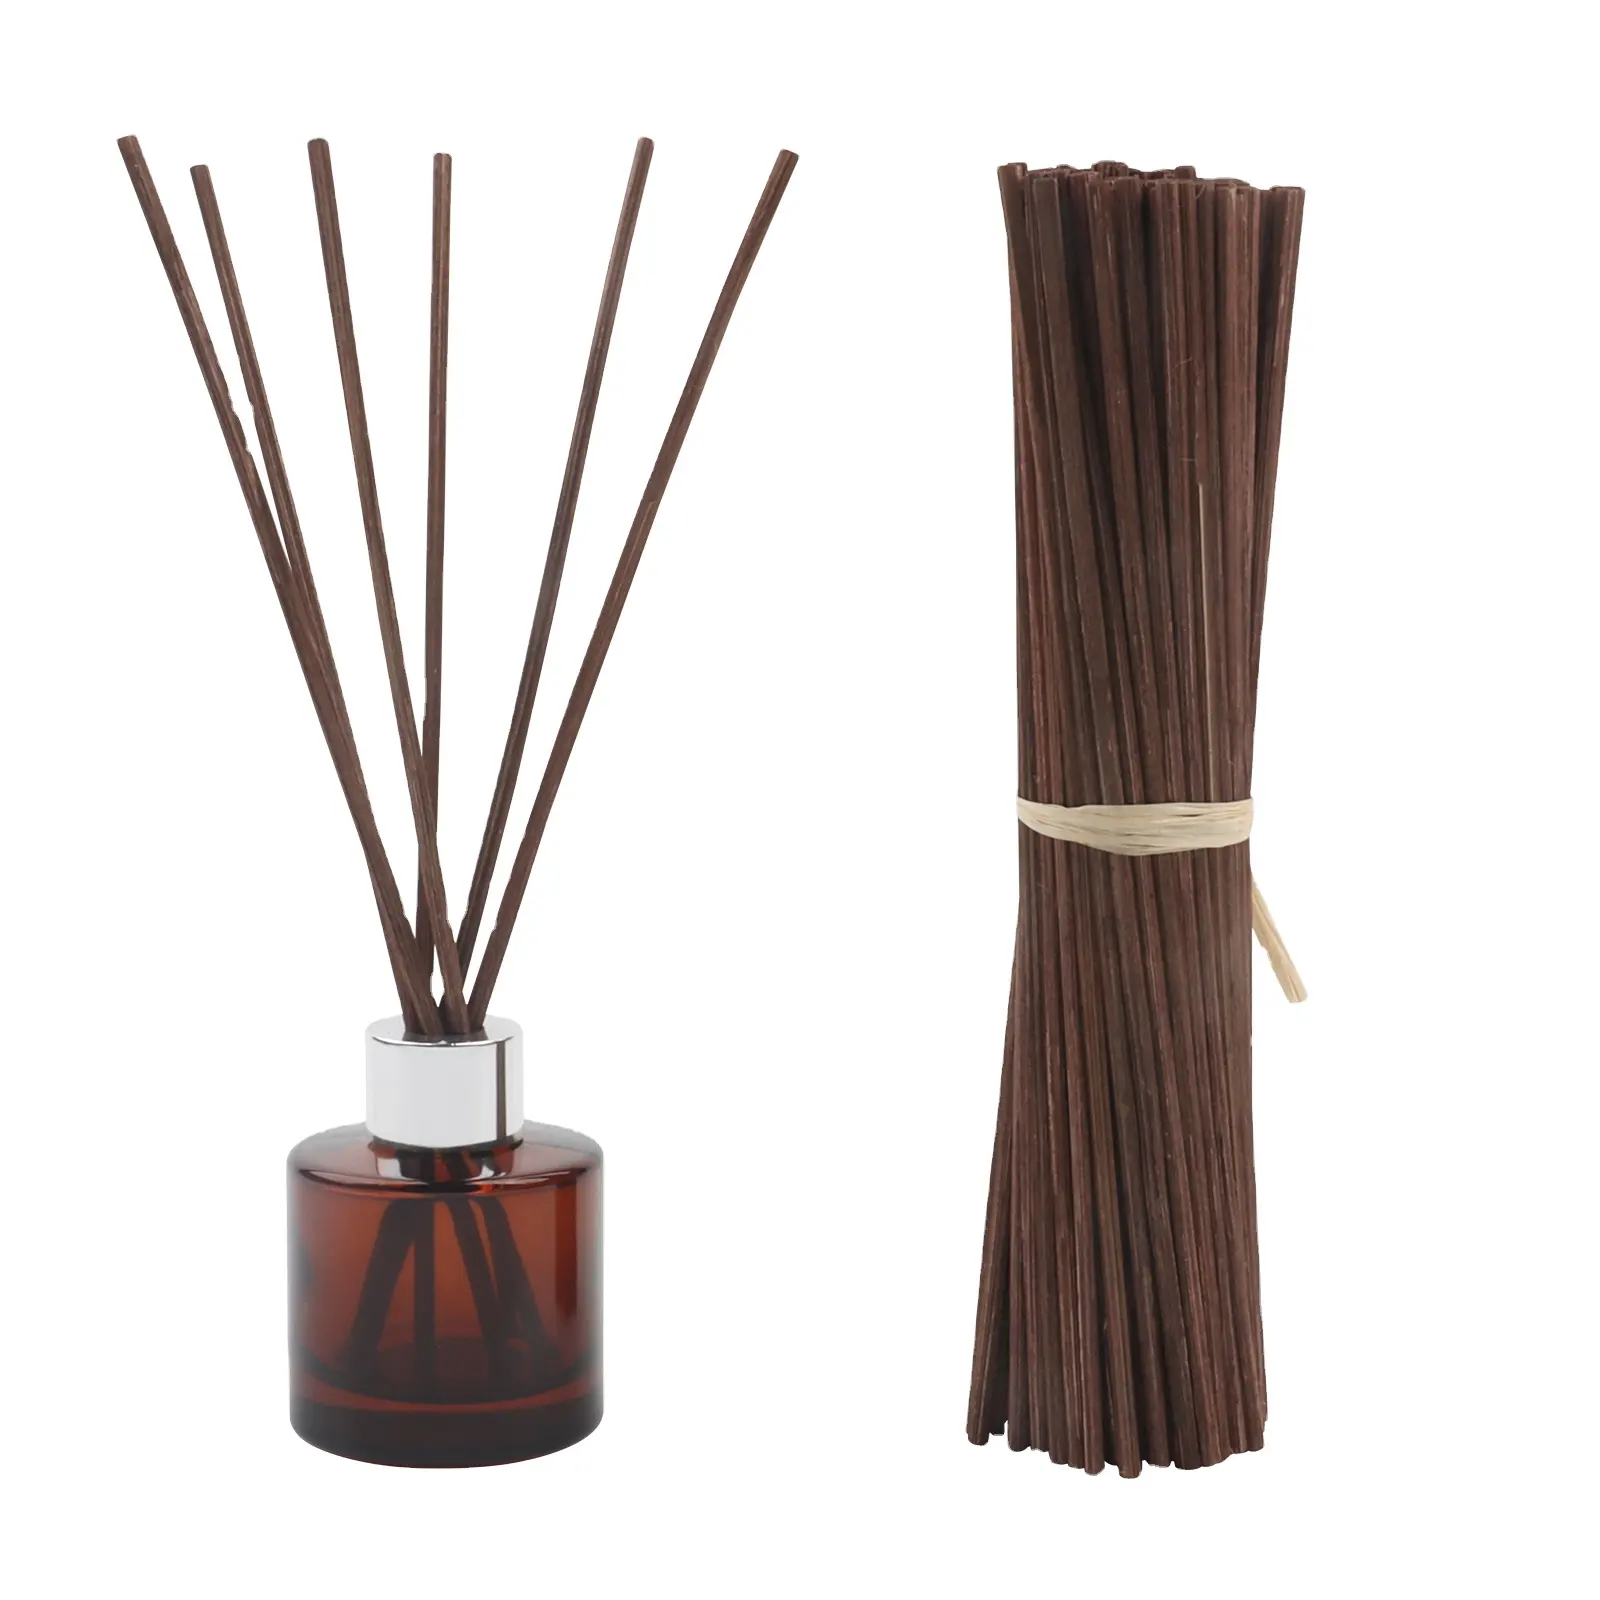 Brown spread rattan bar diameter 3 mm for home office with fragrance diffuser fiber rod